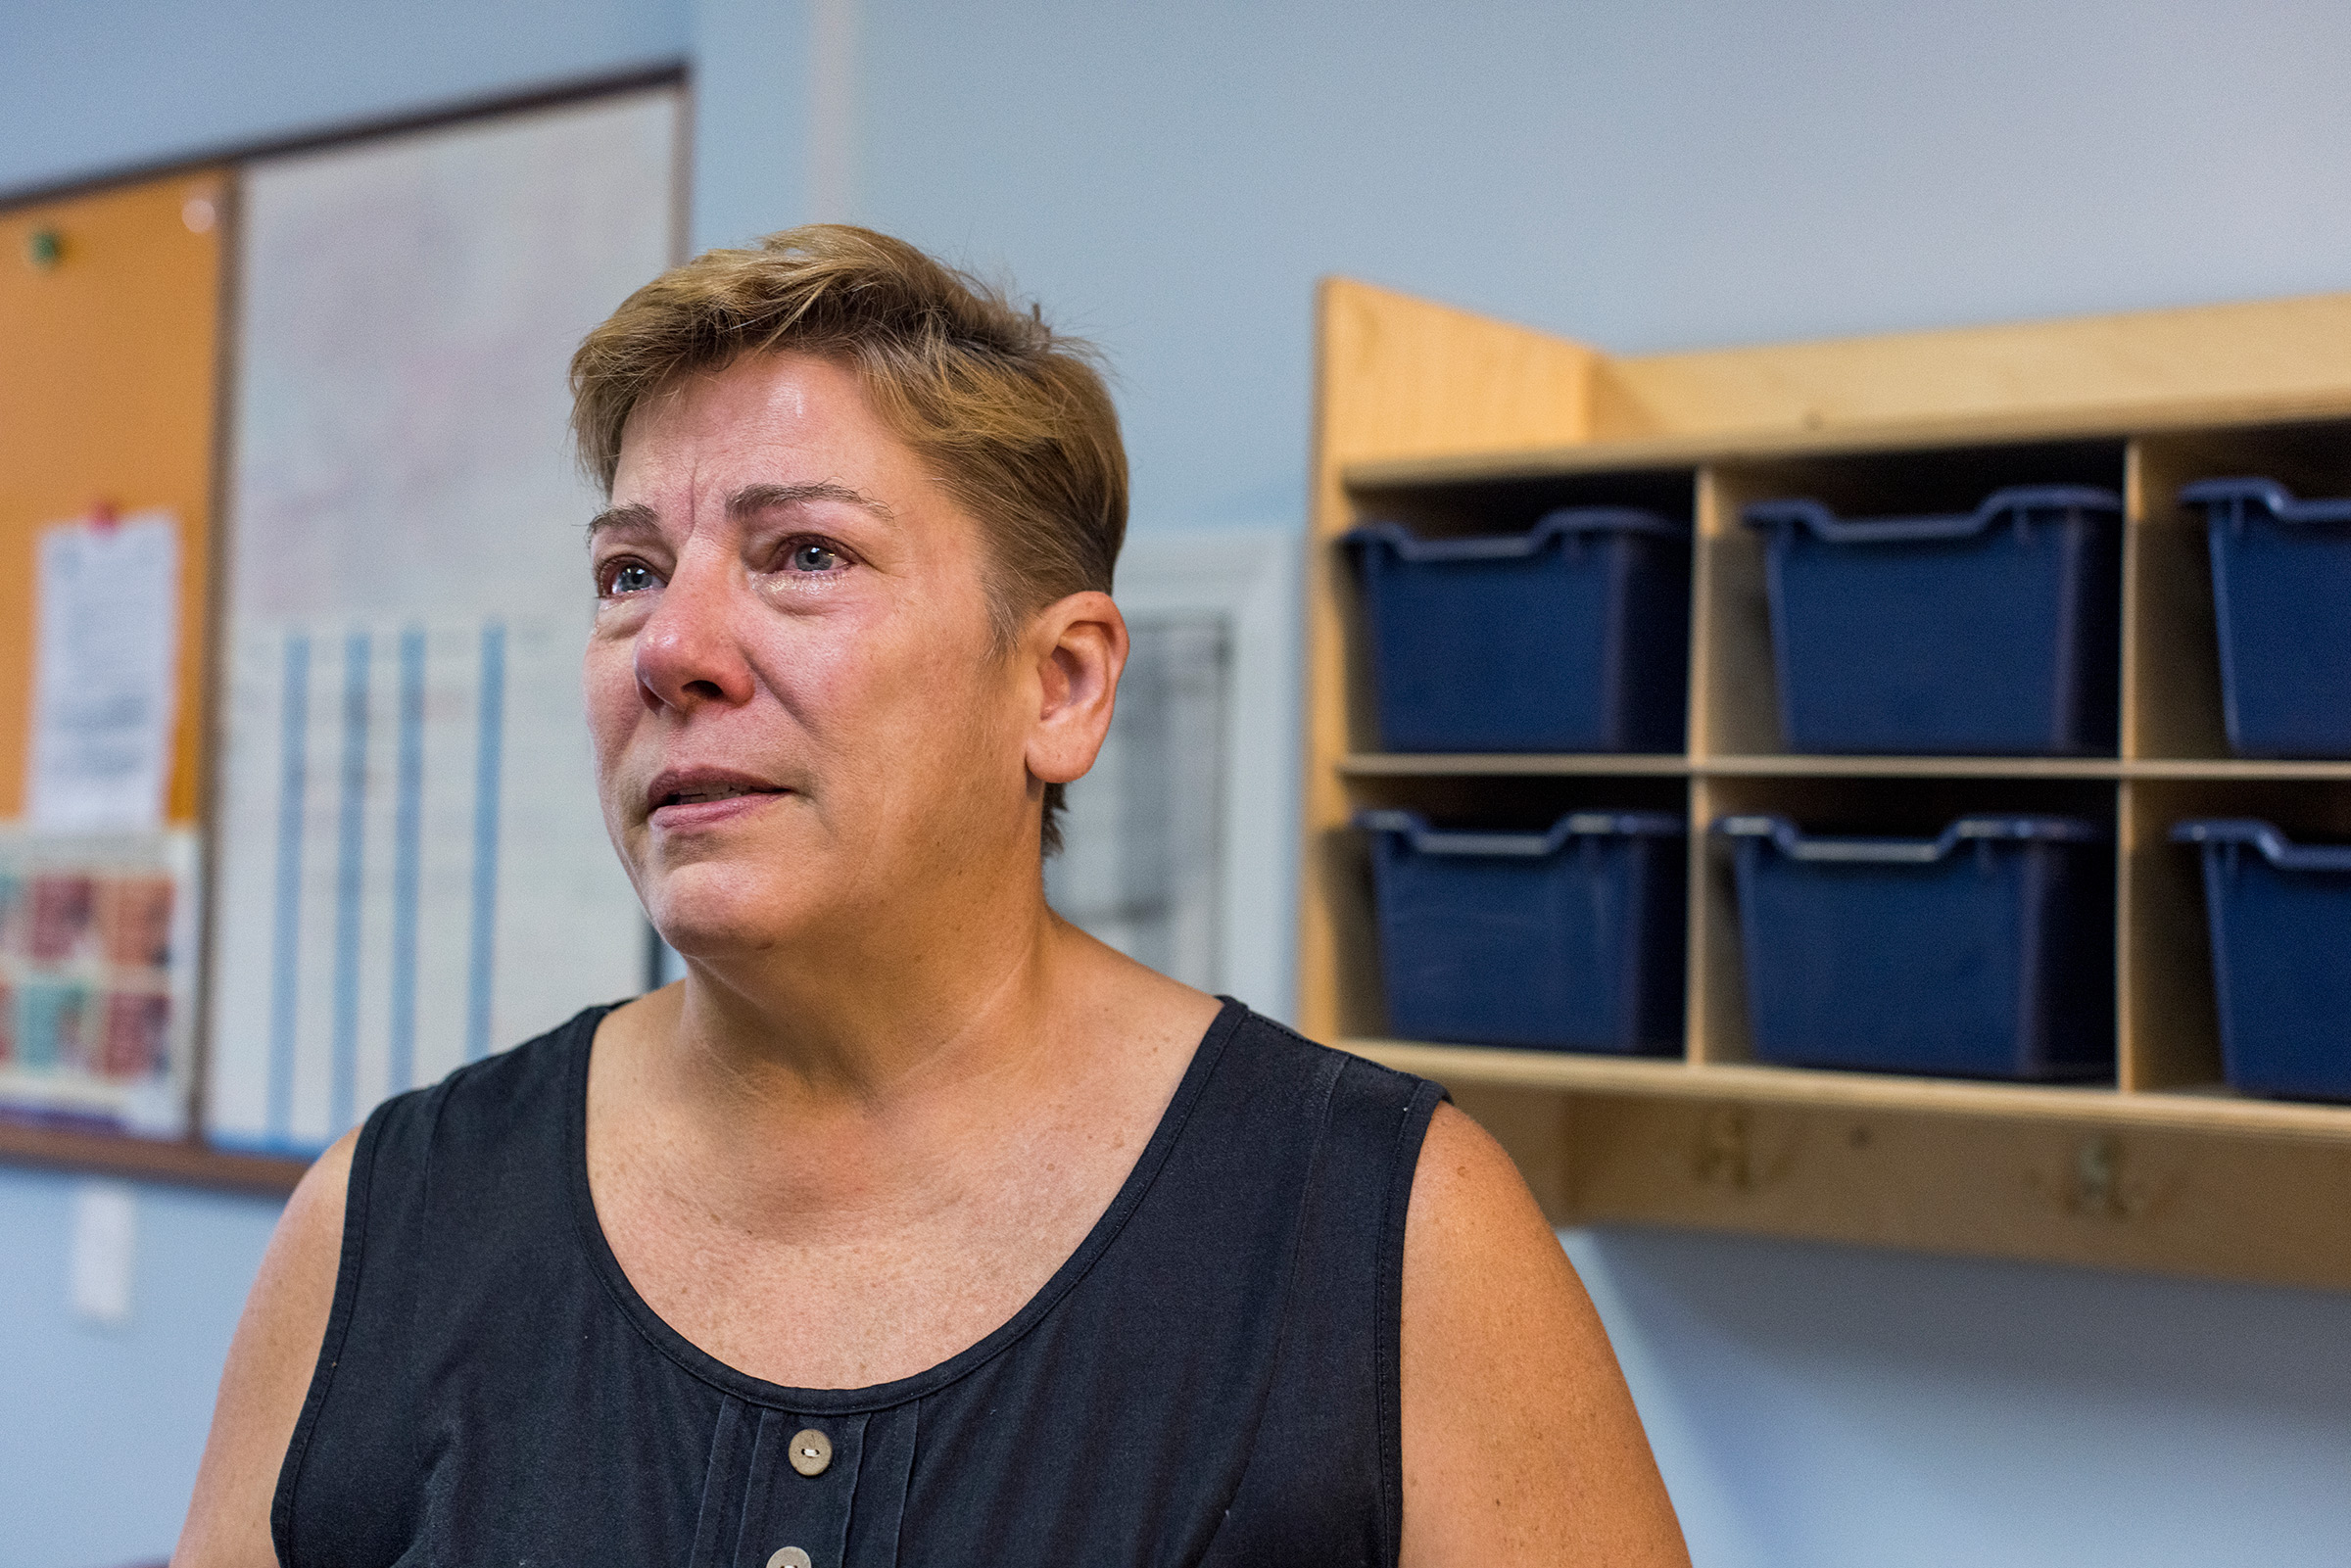 Deborah VanderGaast, who opened the daycare in 2014, decided to close the business because she couldn’t find enough workers. (Kathryn Gamble for TIME)